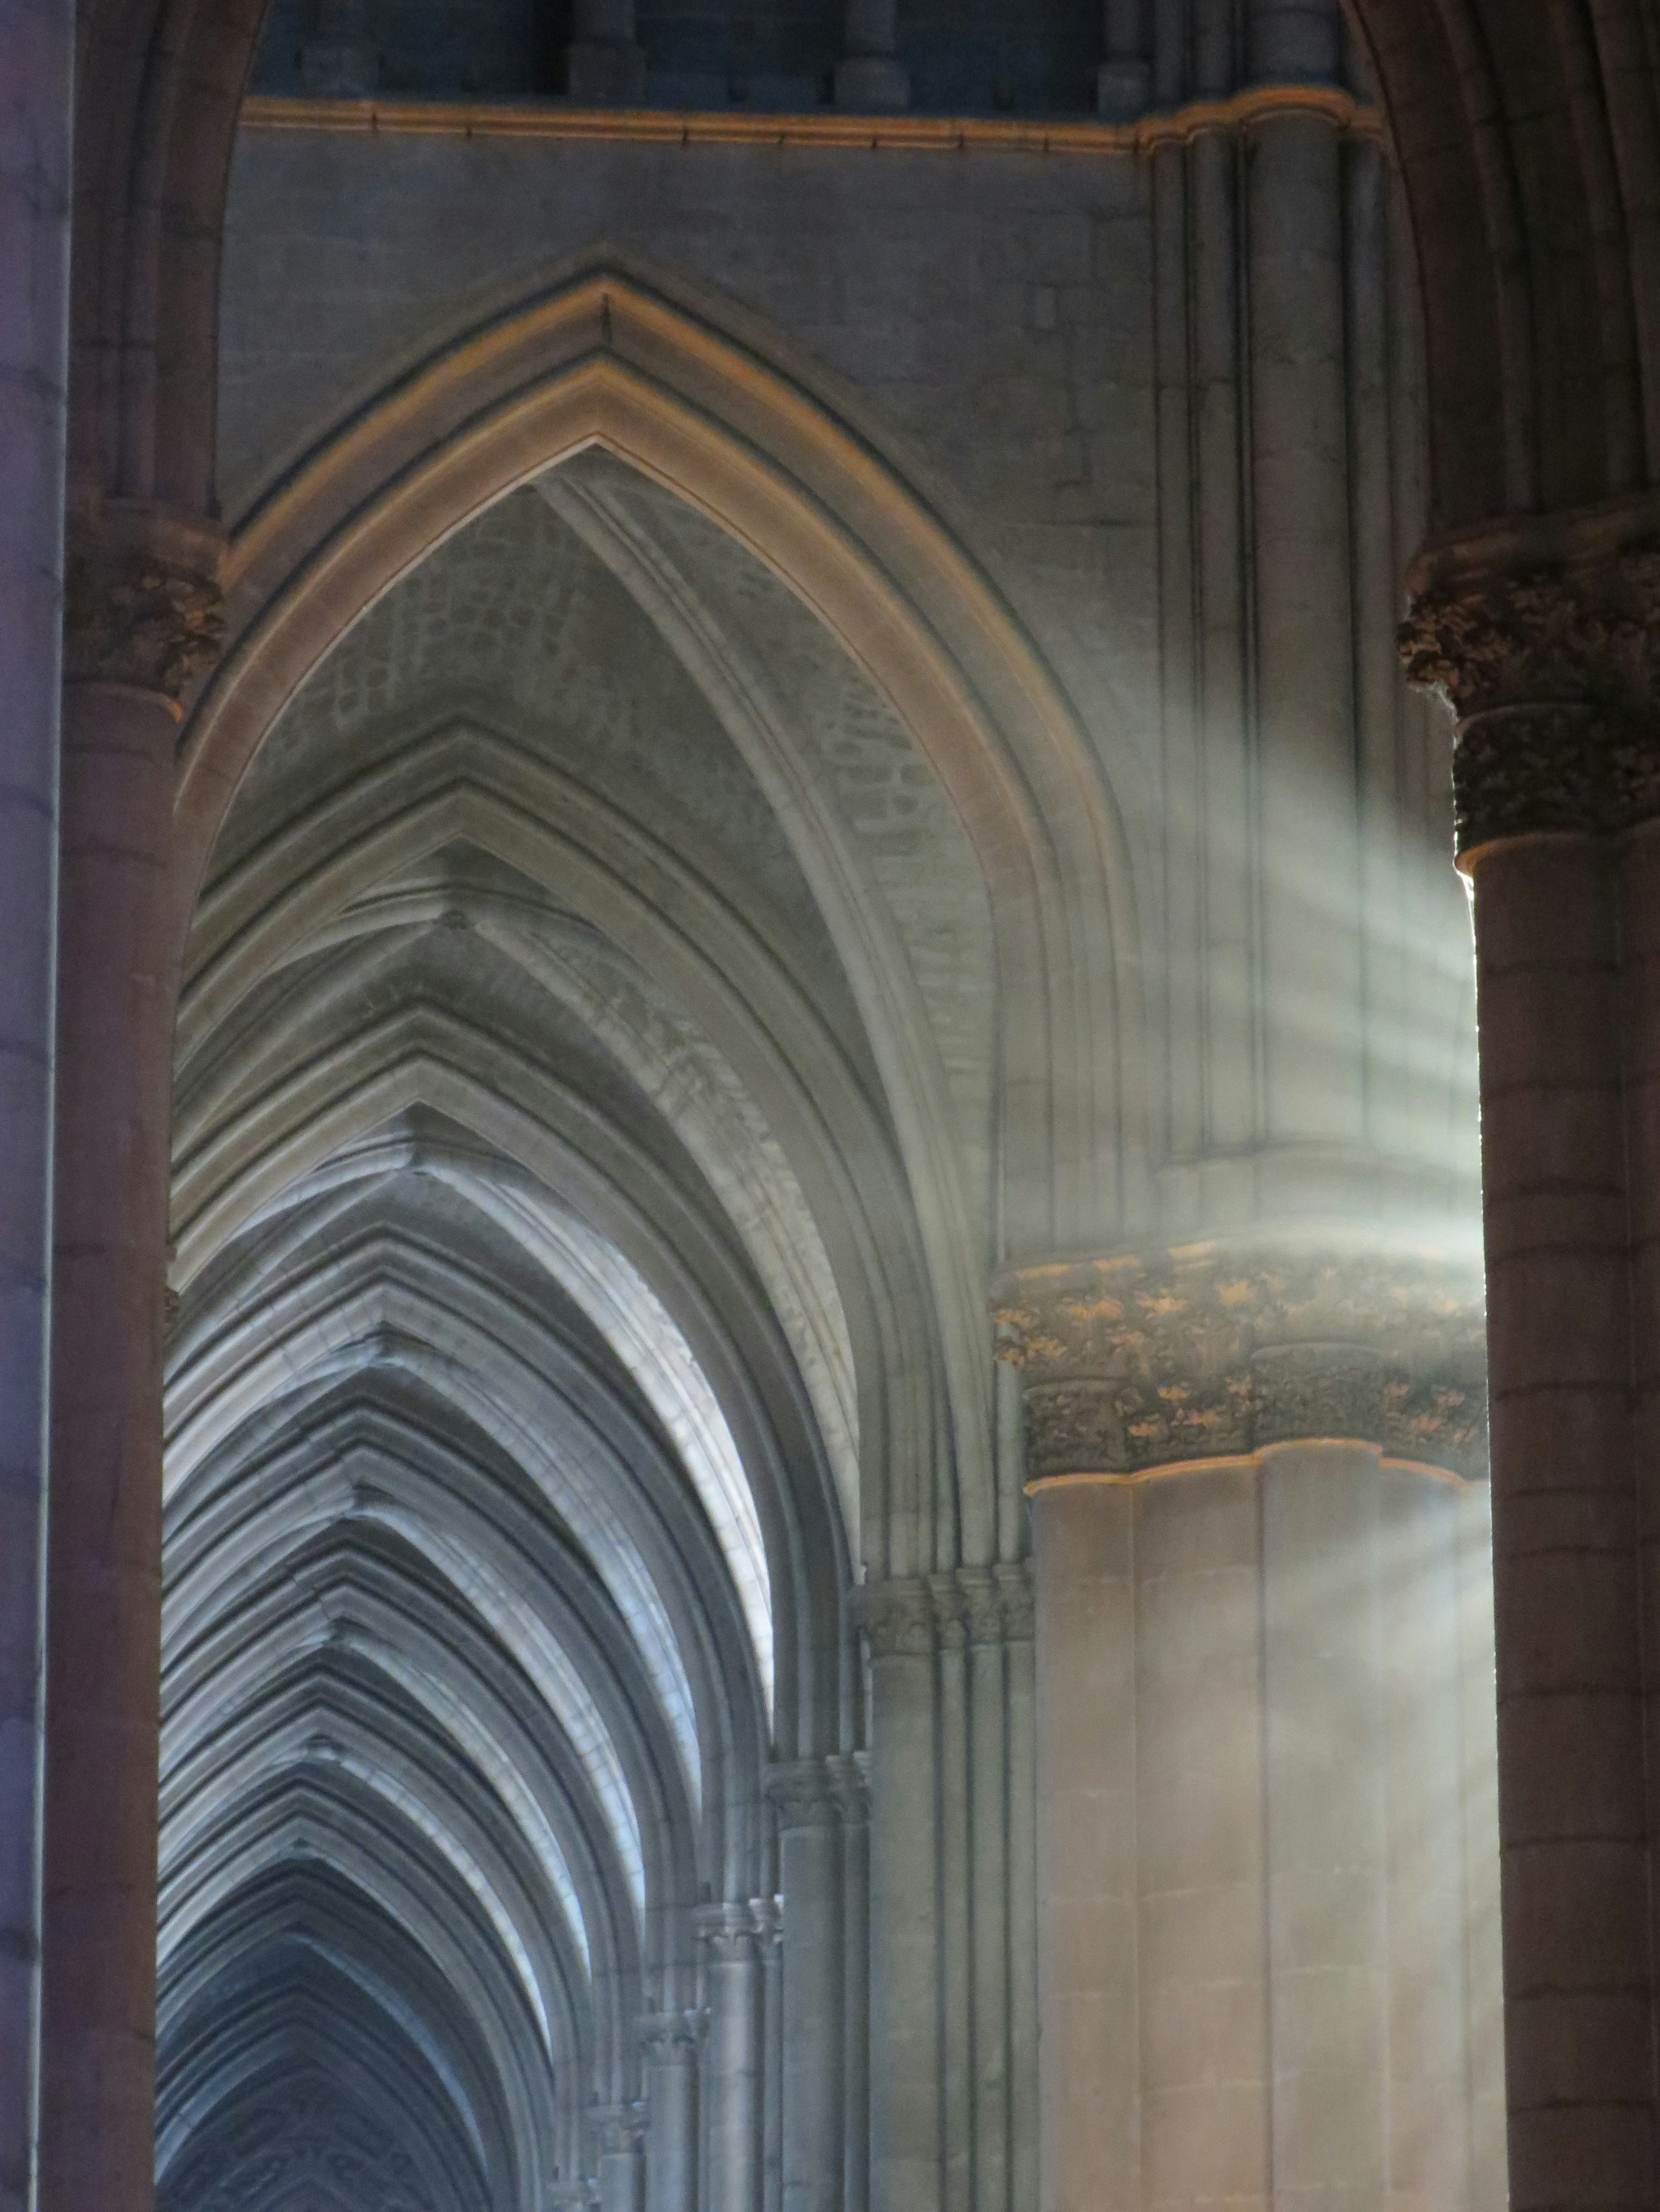 Spiritual rays of sunlight shine in a window of the Reims Cathedral. The light illuminates the first in a long row of gothic arches in the interior of the church.